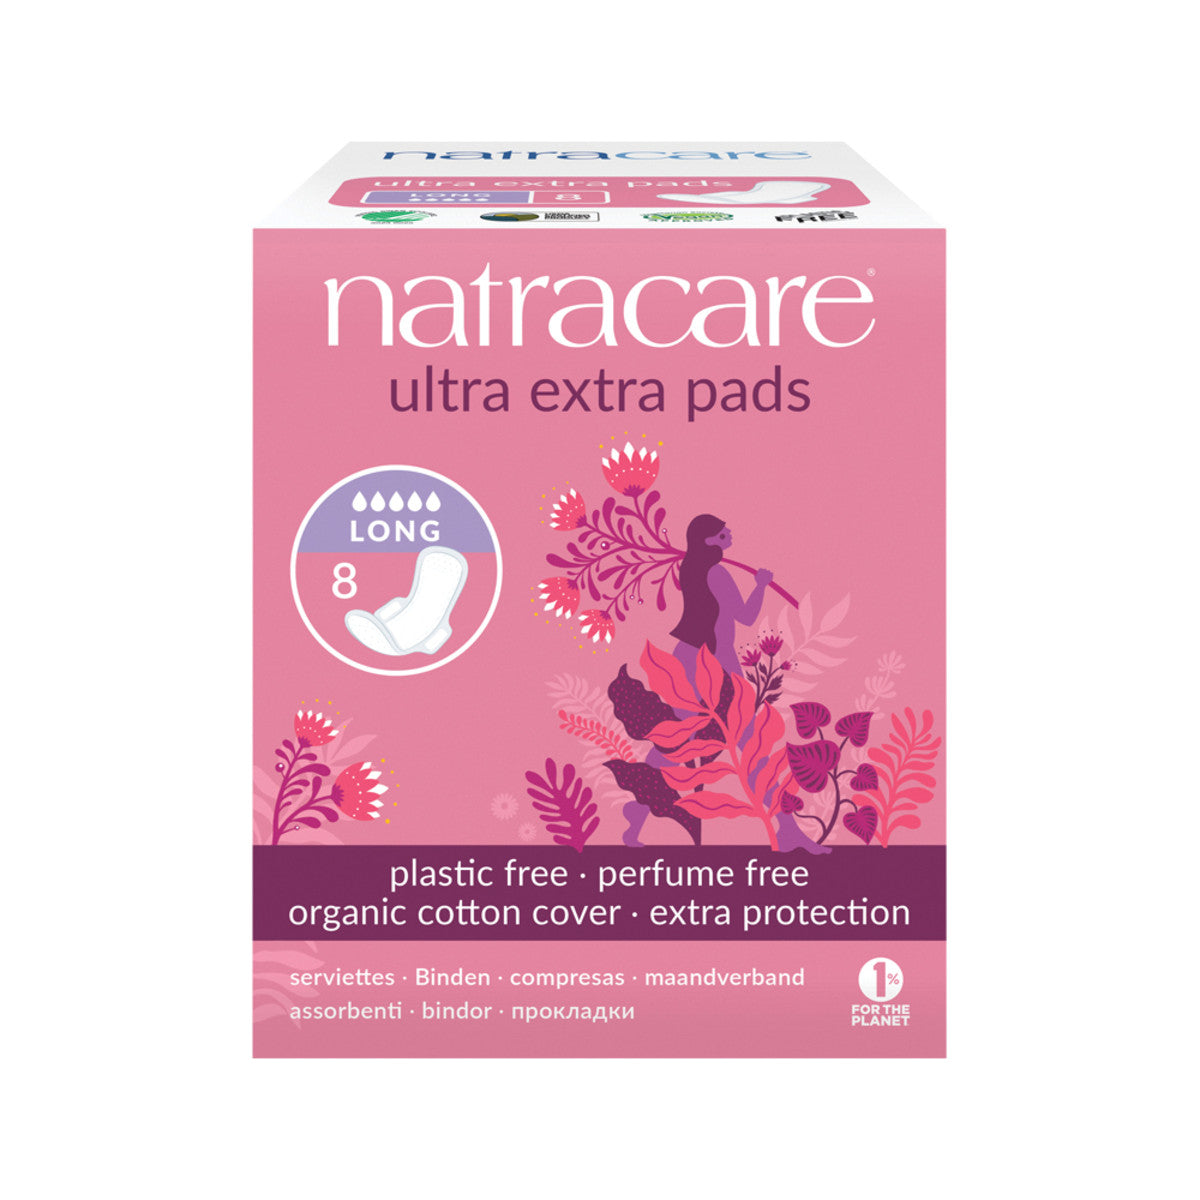 Natracare - Ultra Extra Pads Long with Organic Cotton Cover